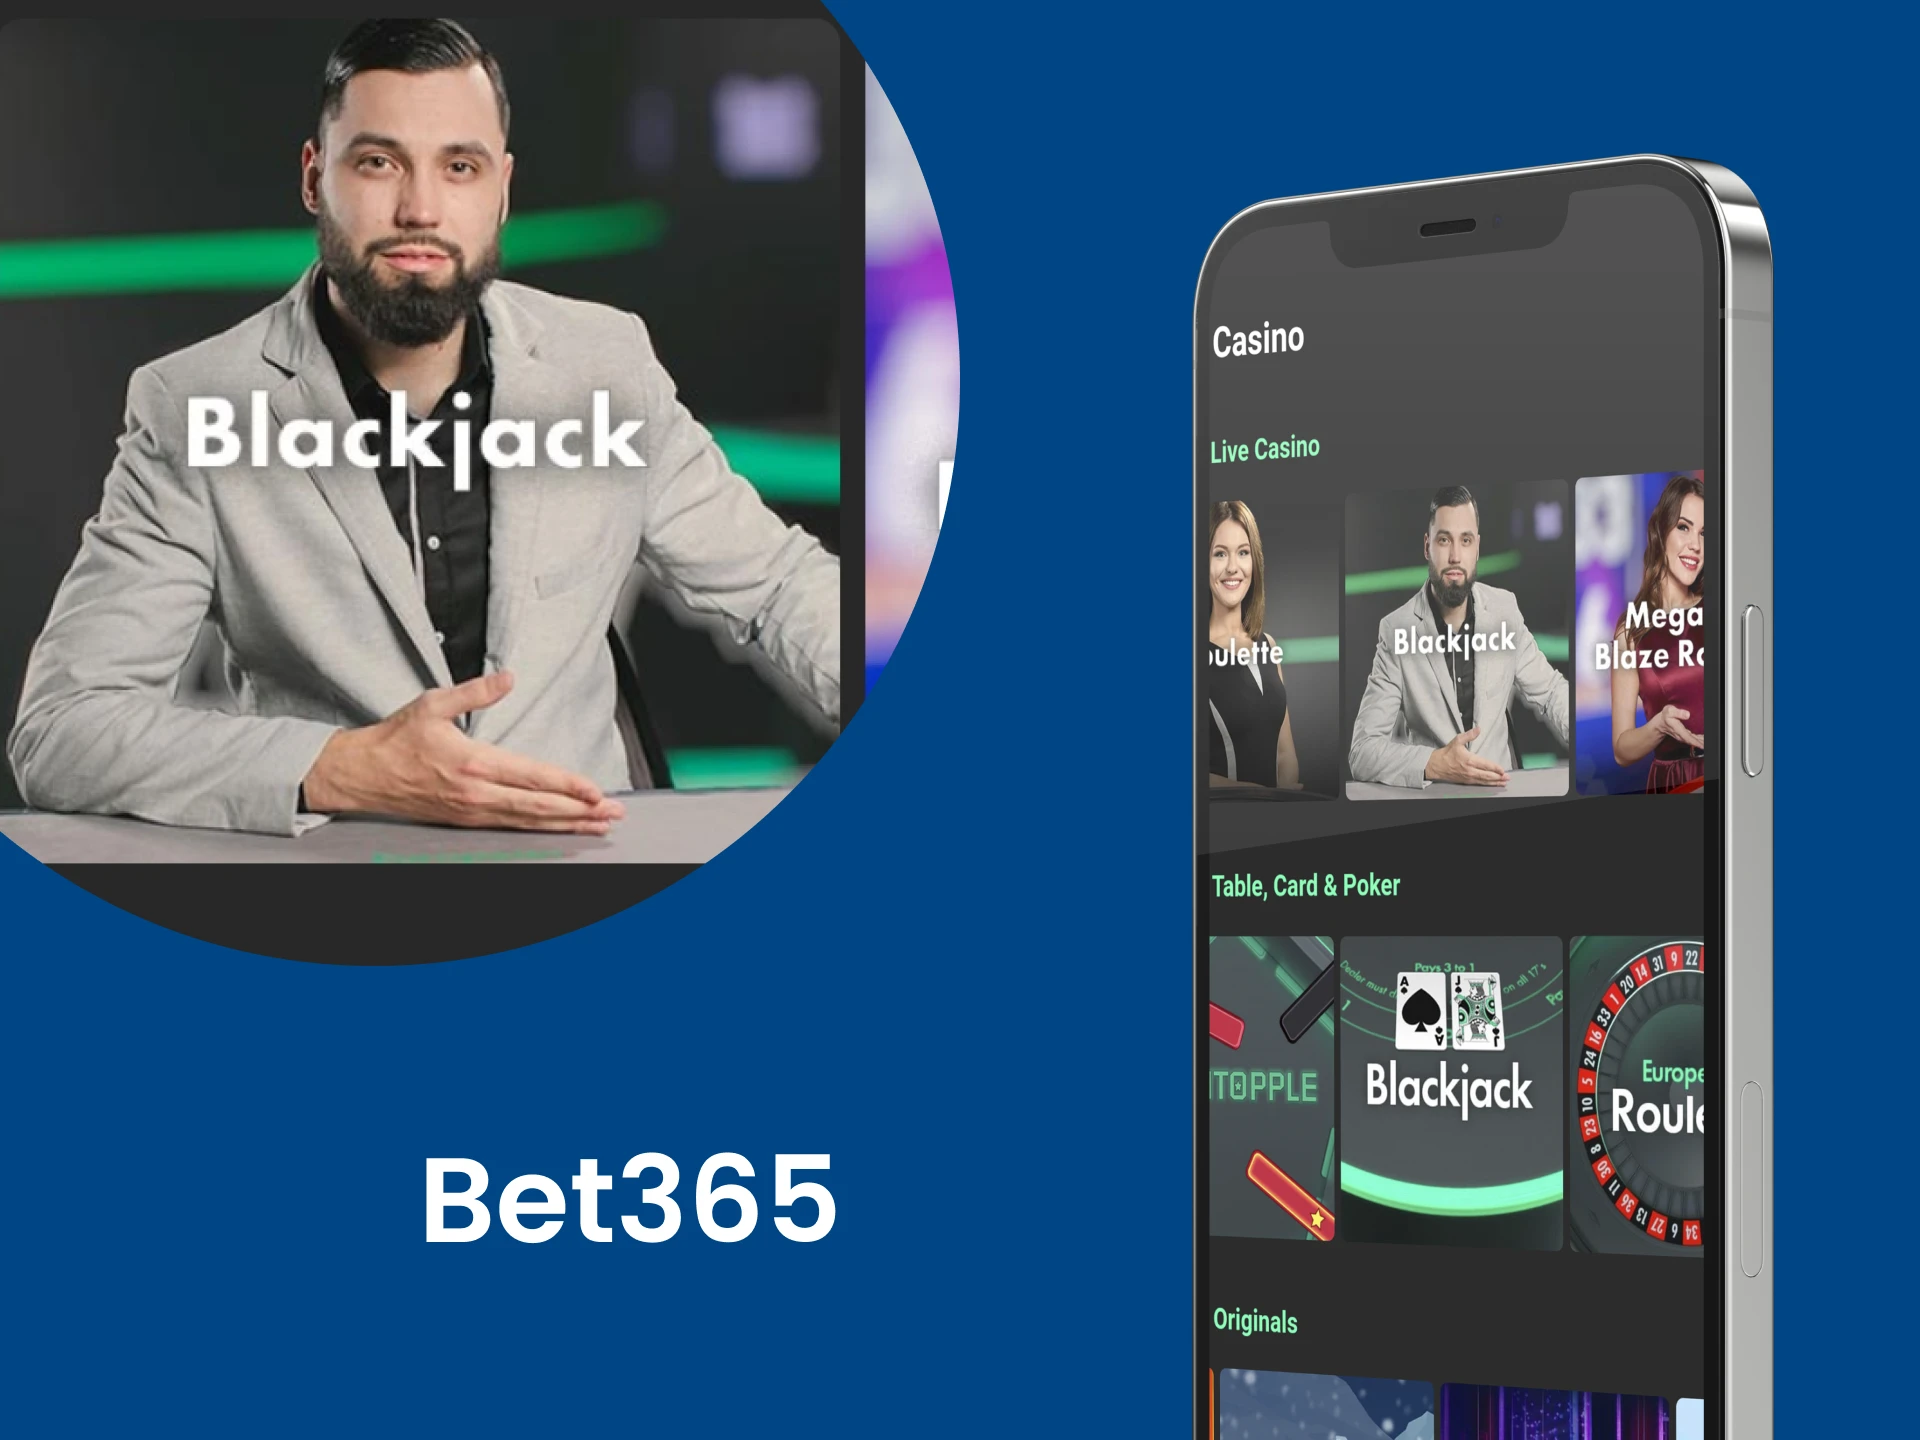 To play BlackJack, choose the Bet365 application.